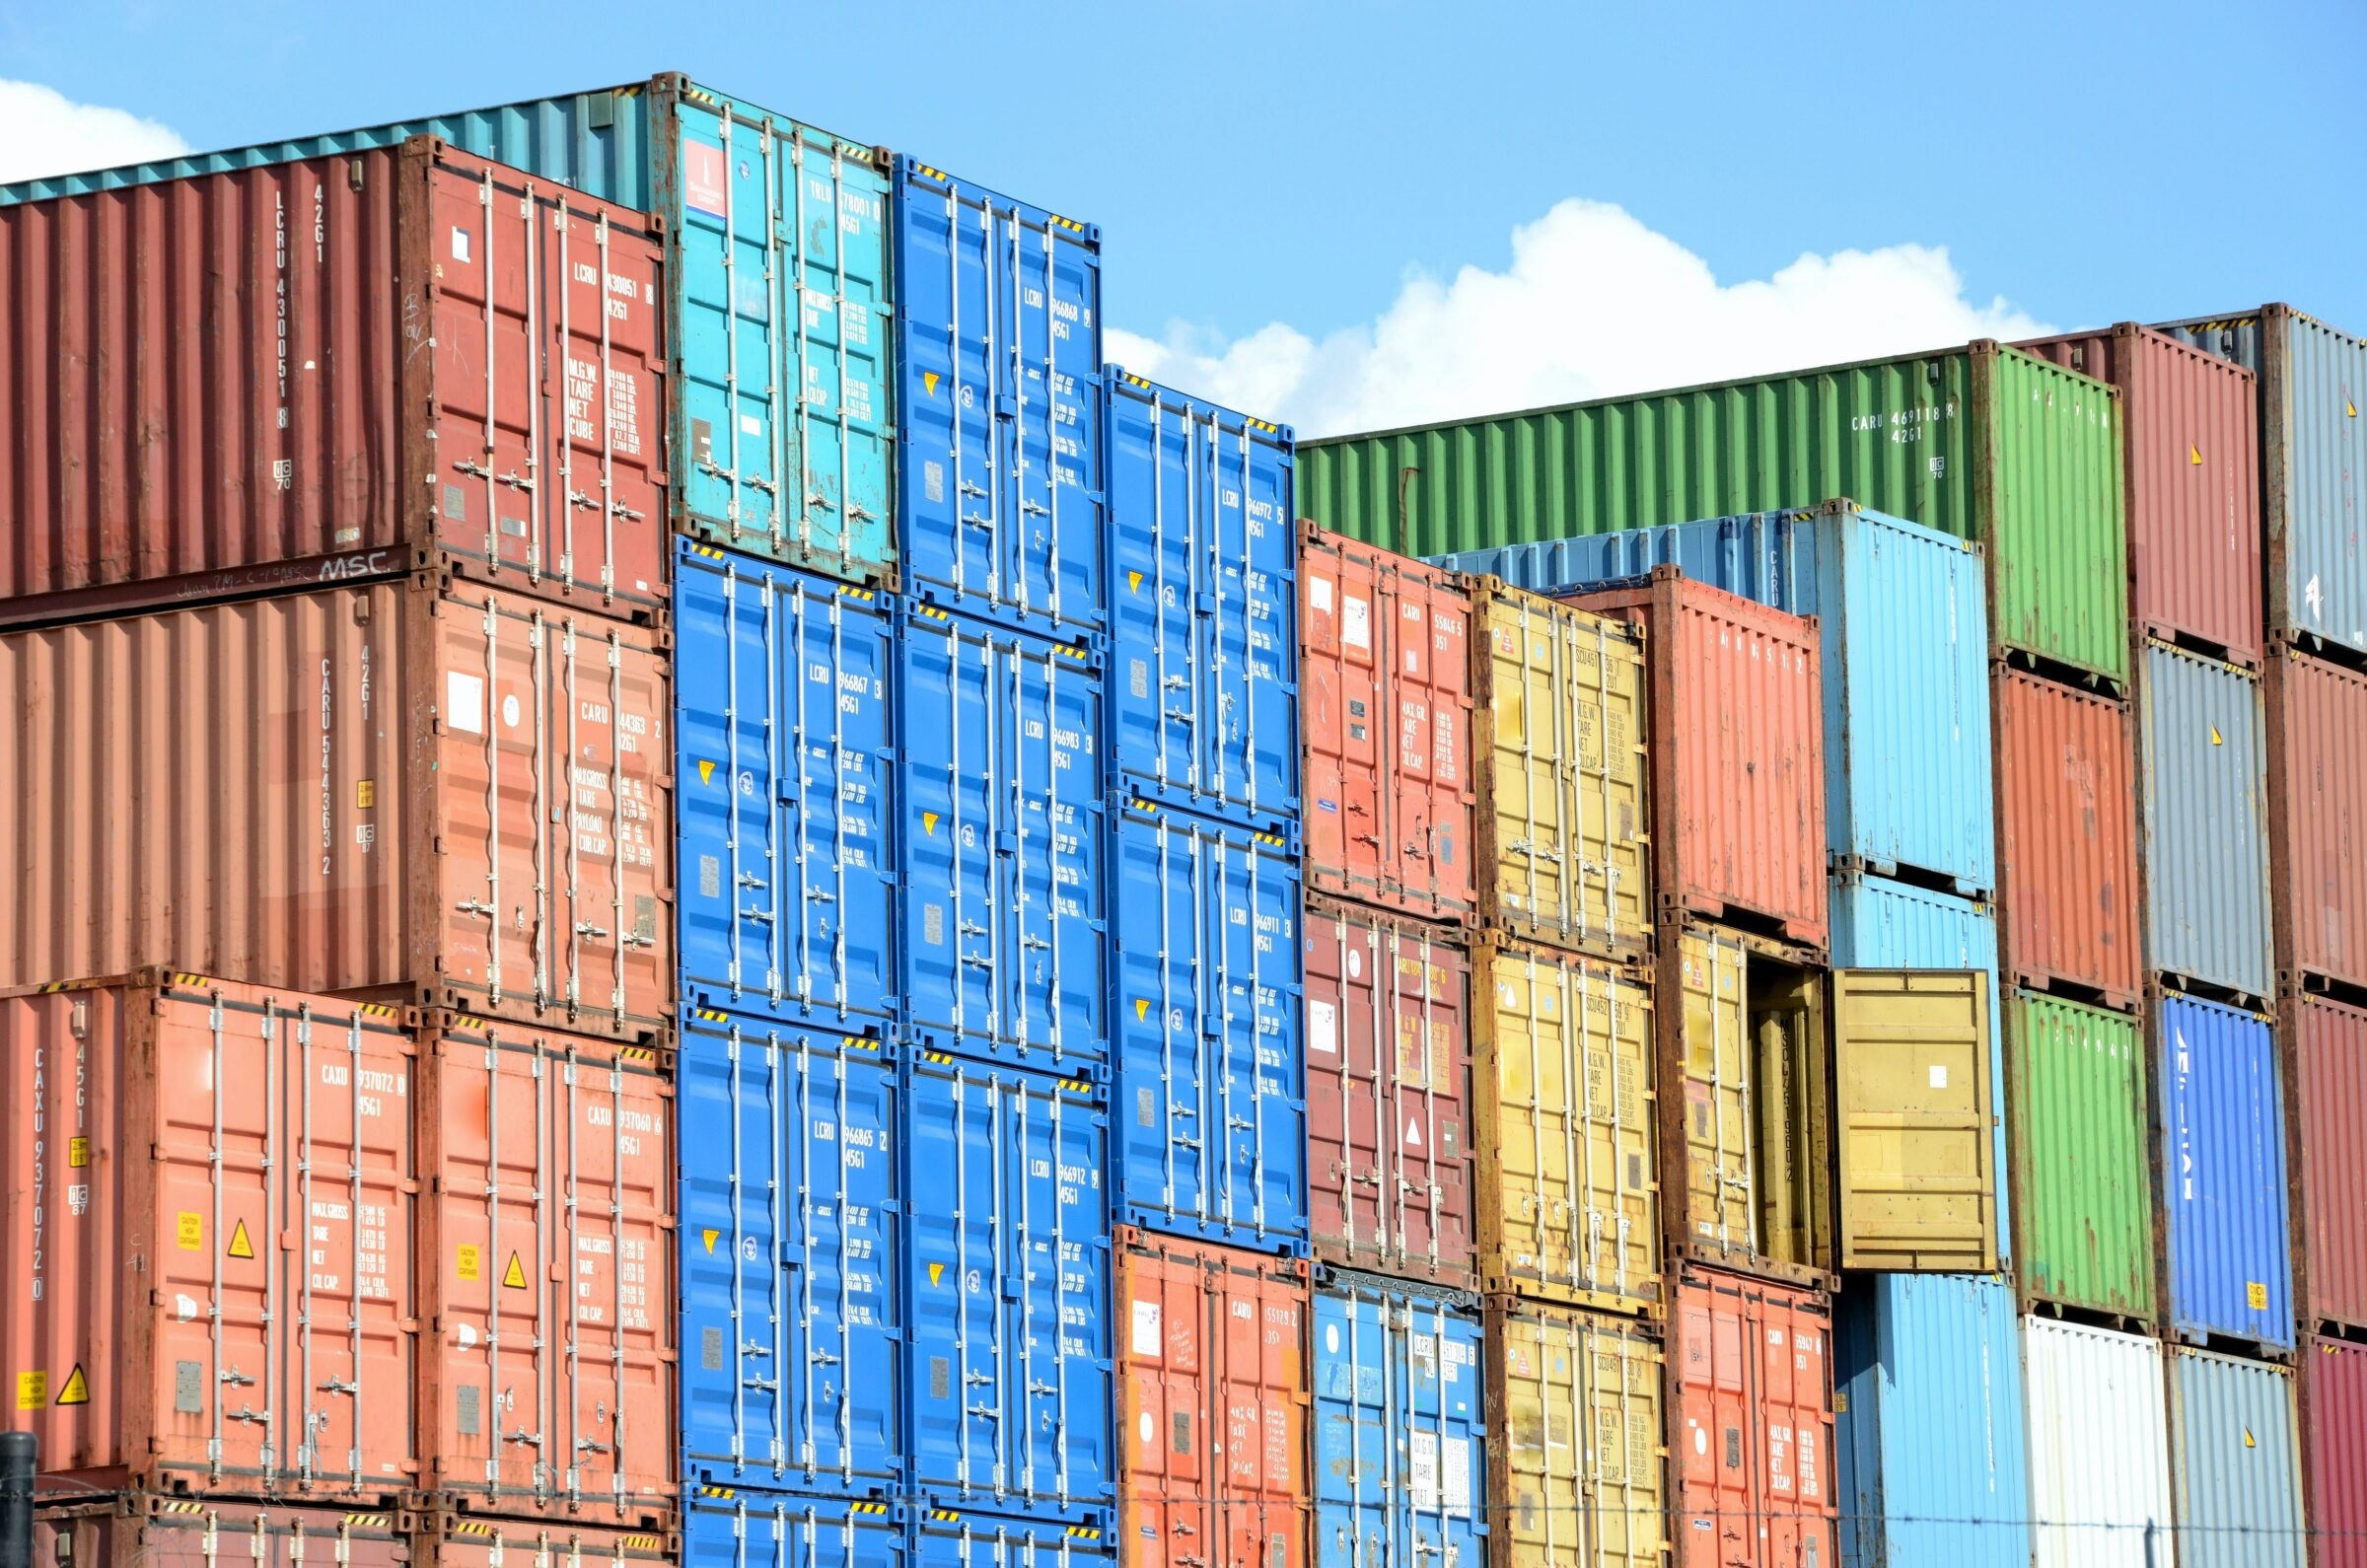 How to Track Shipping Containers with IoT